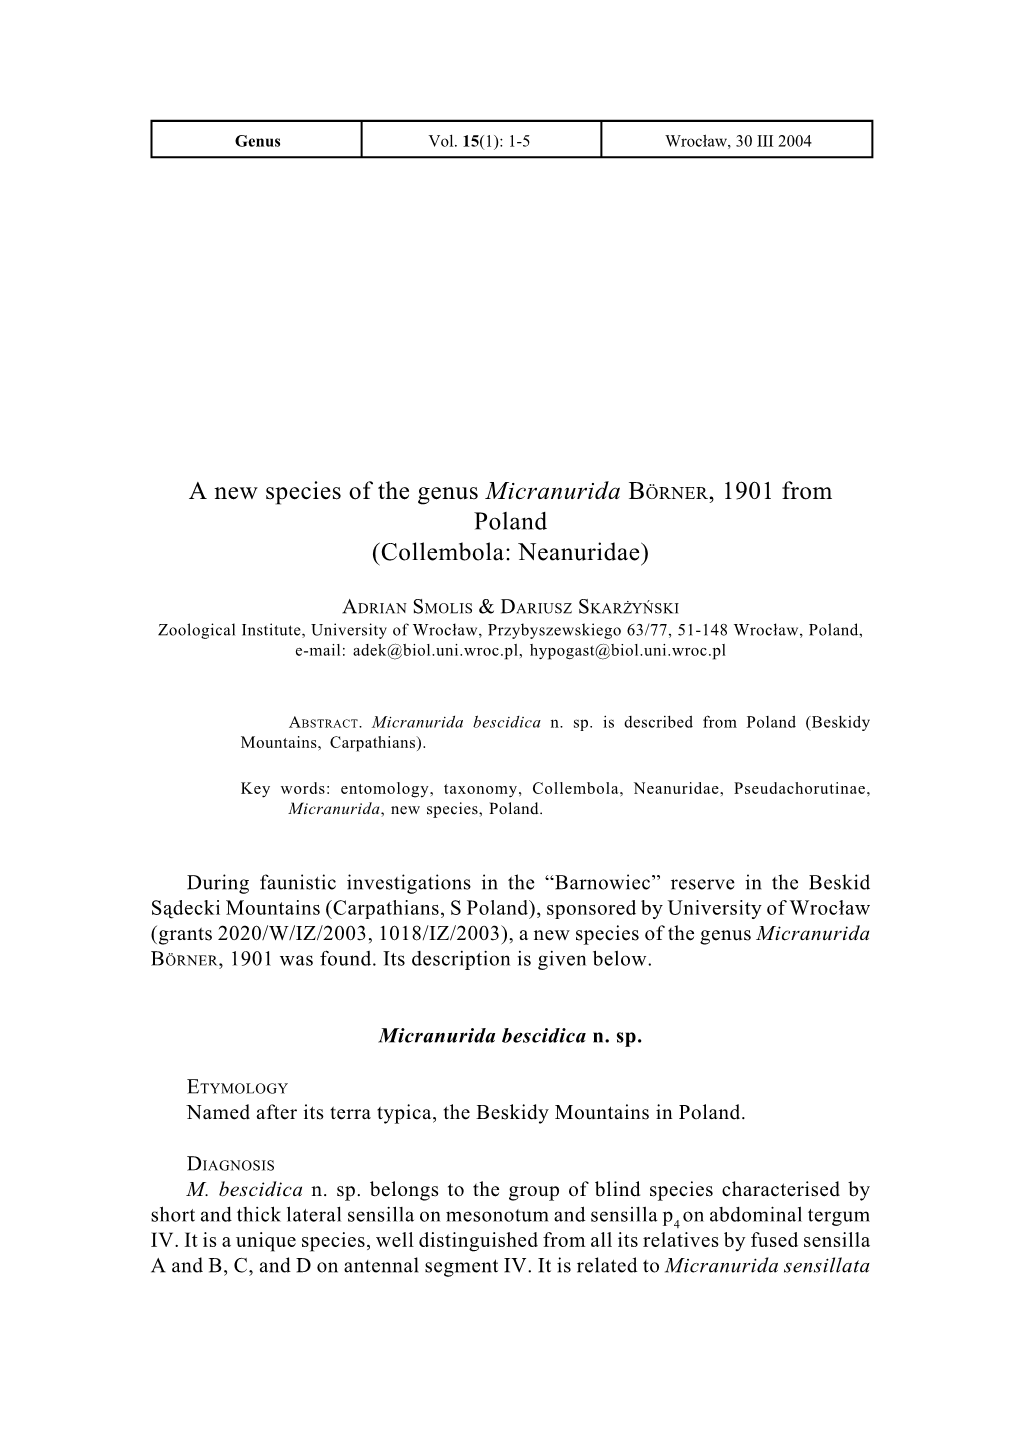 A New Species of the Genus Micranurida BÖRNER, 1901 from Poland (Collembola: Neanuridae)